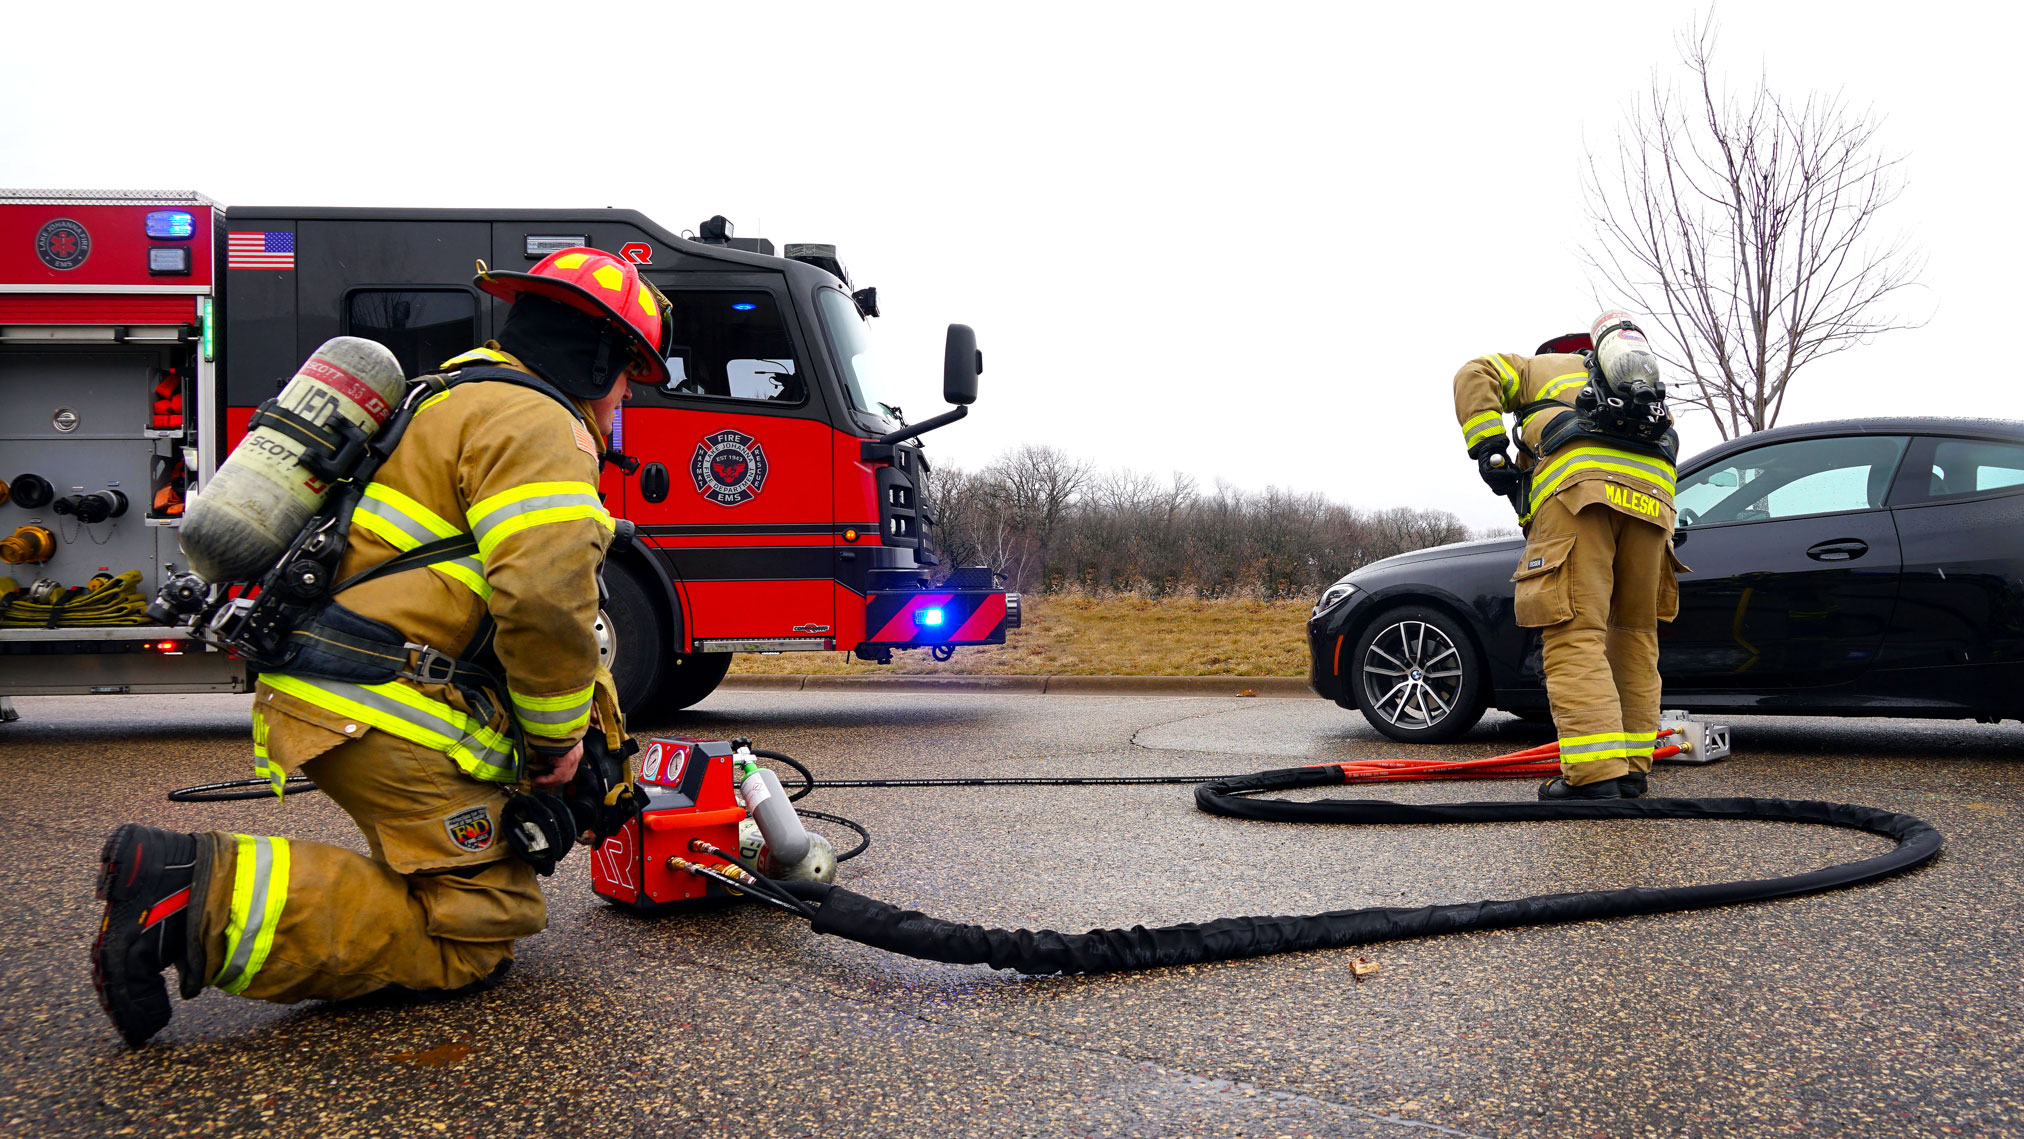 Featured image for “Rosenbauer Battery Extinguishing System Technology | BEST EV Fire Equipment”